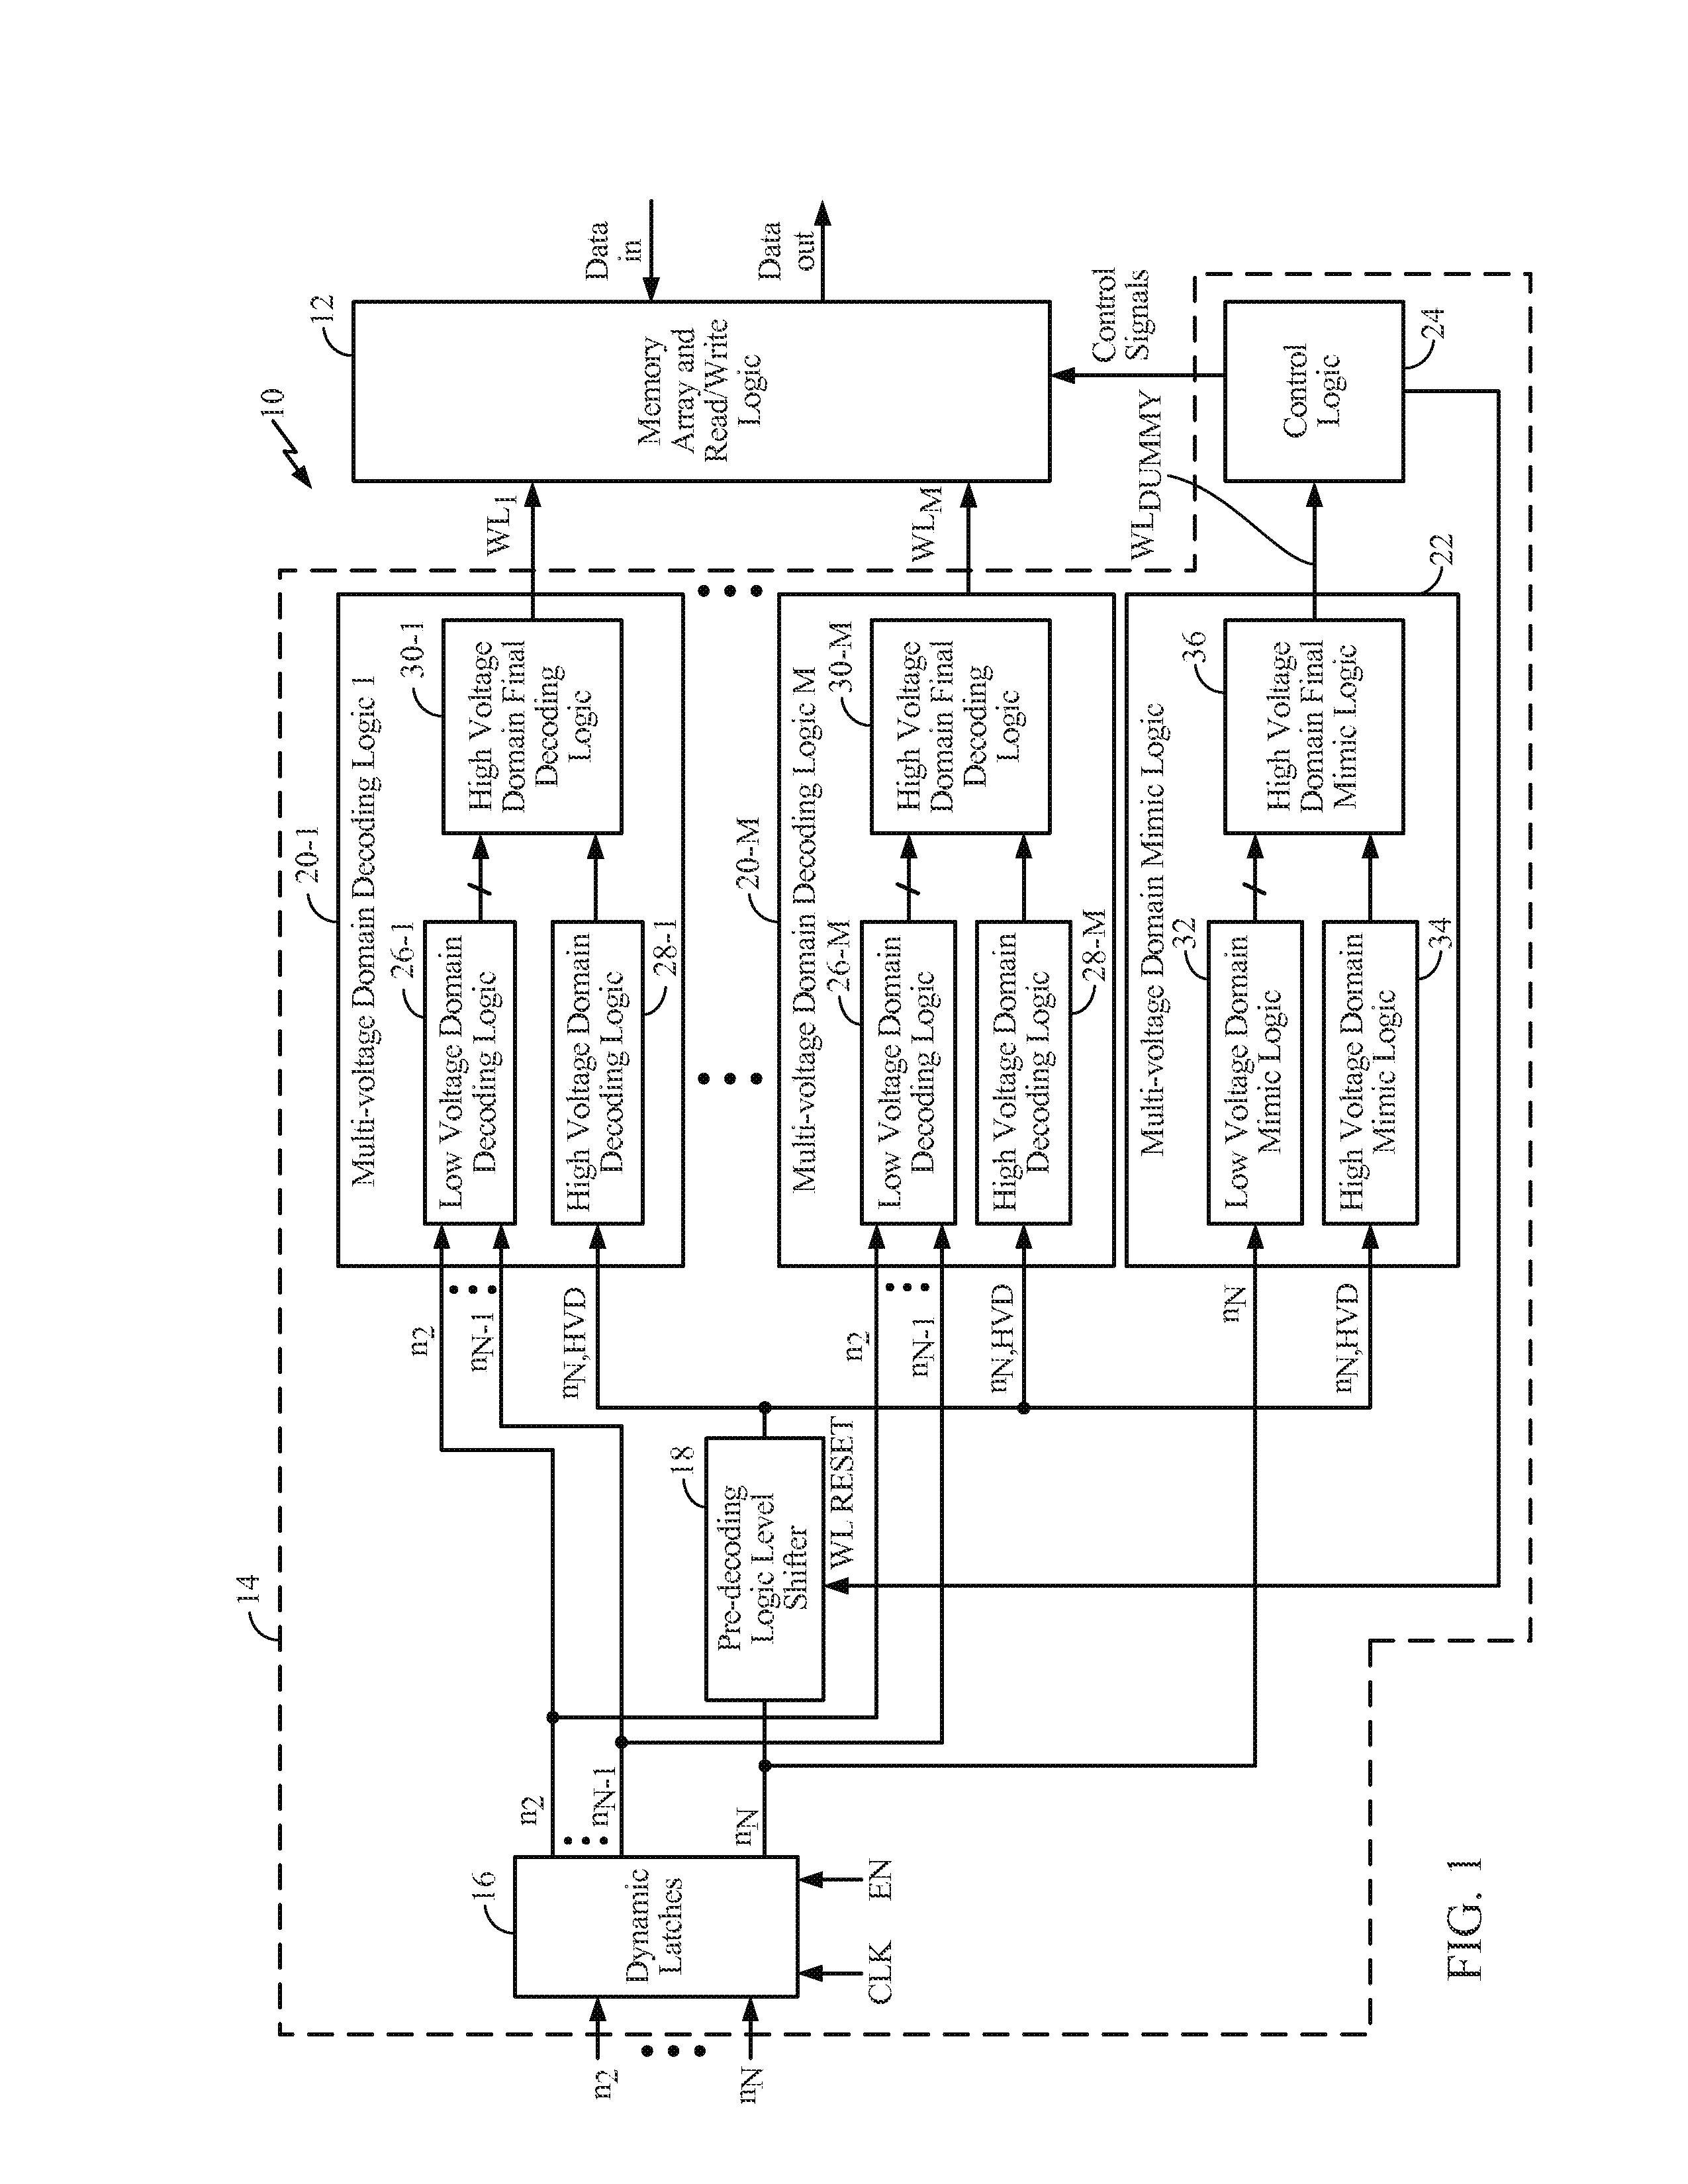 Mimicking Multi-Voltage Domain Wordline Decoding Logic for a Memory Array